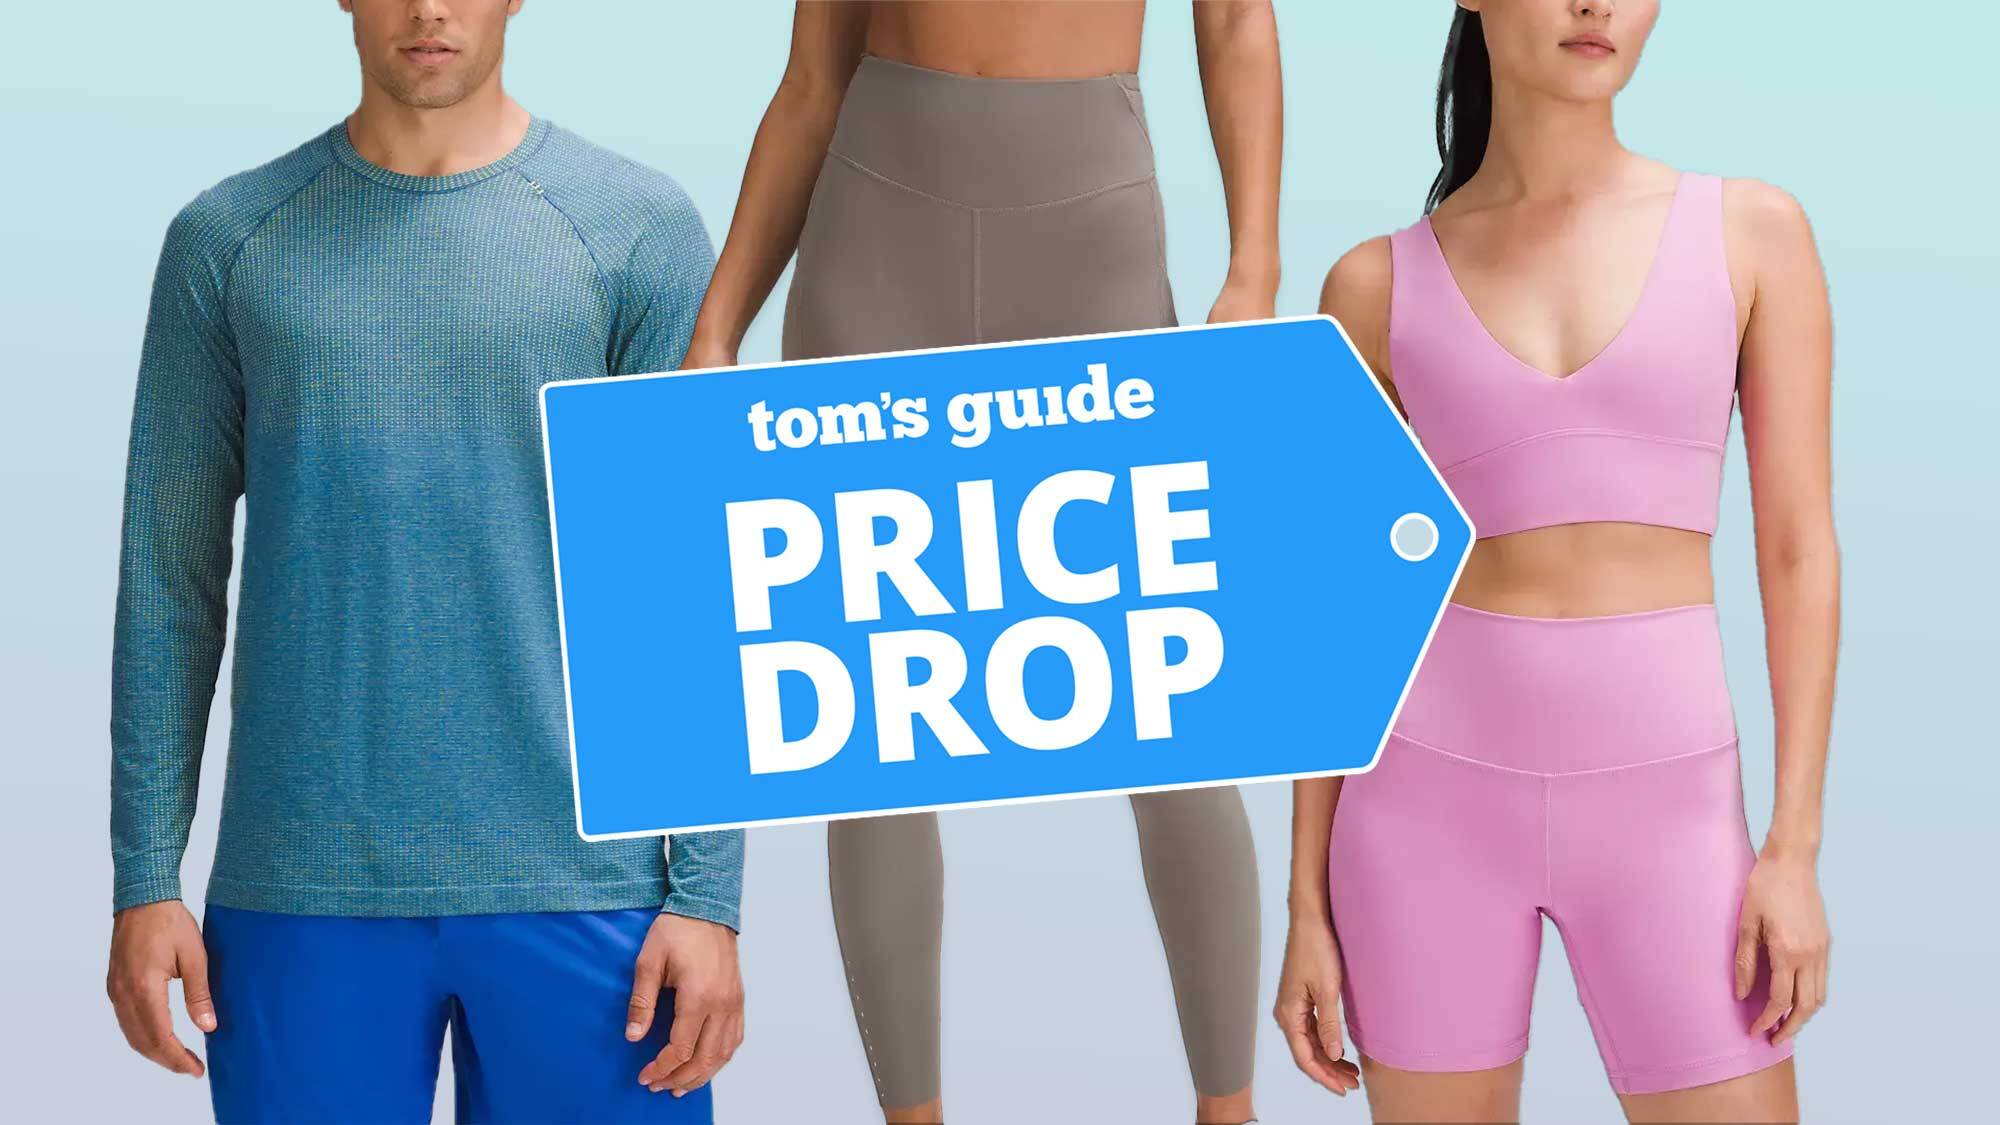 My 7 favorite items in the lululemon 'We Made Too Much' deals